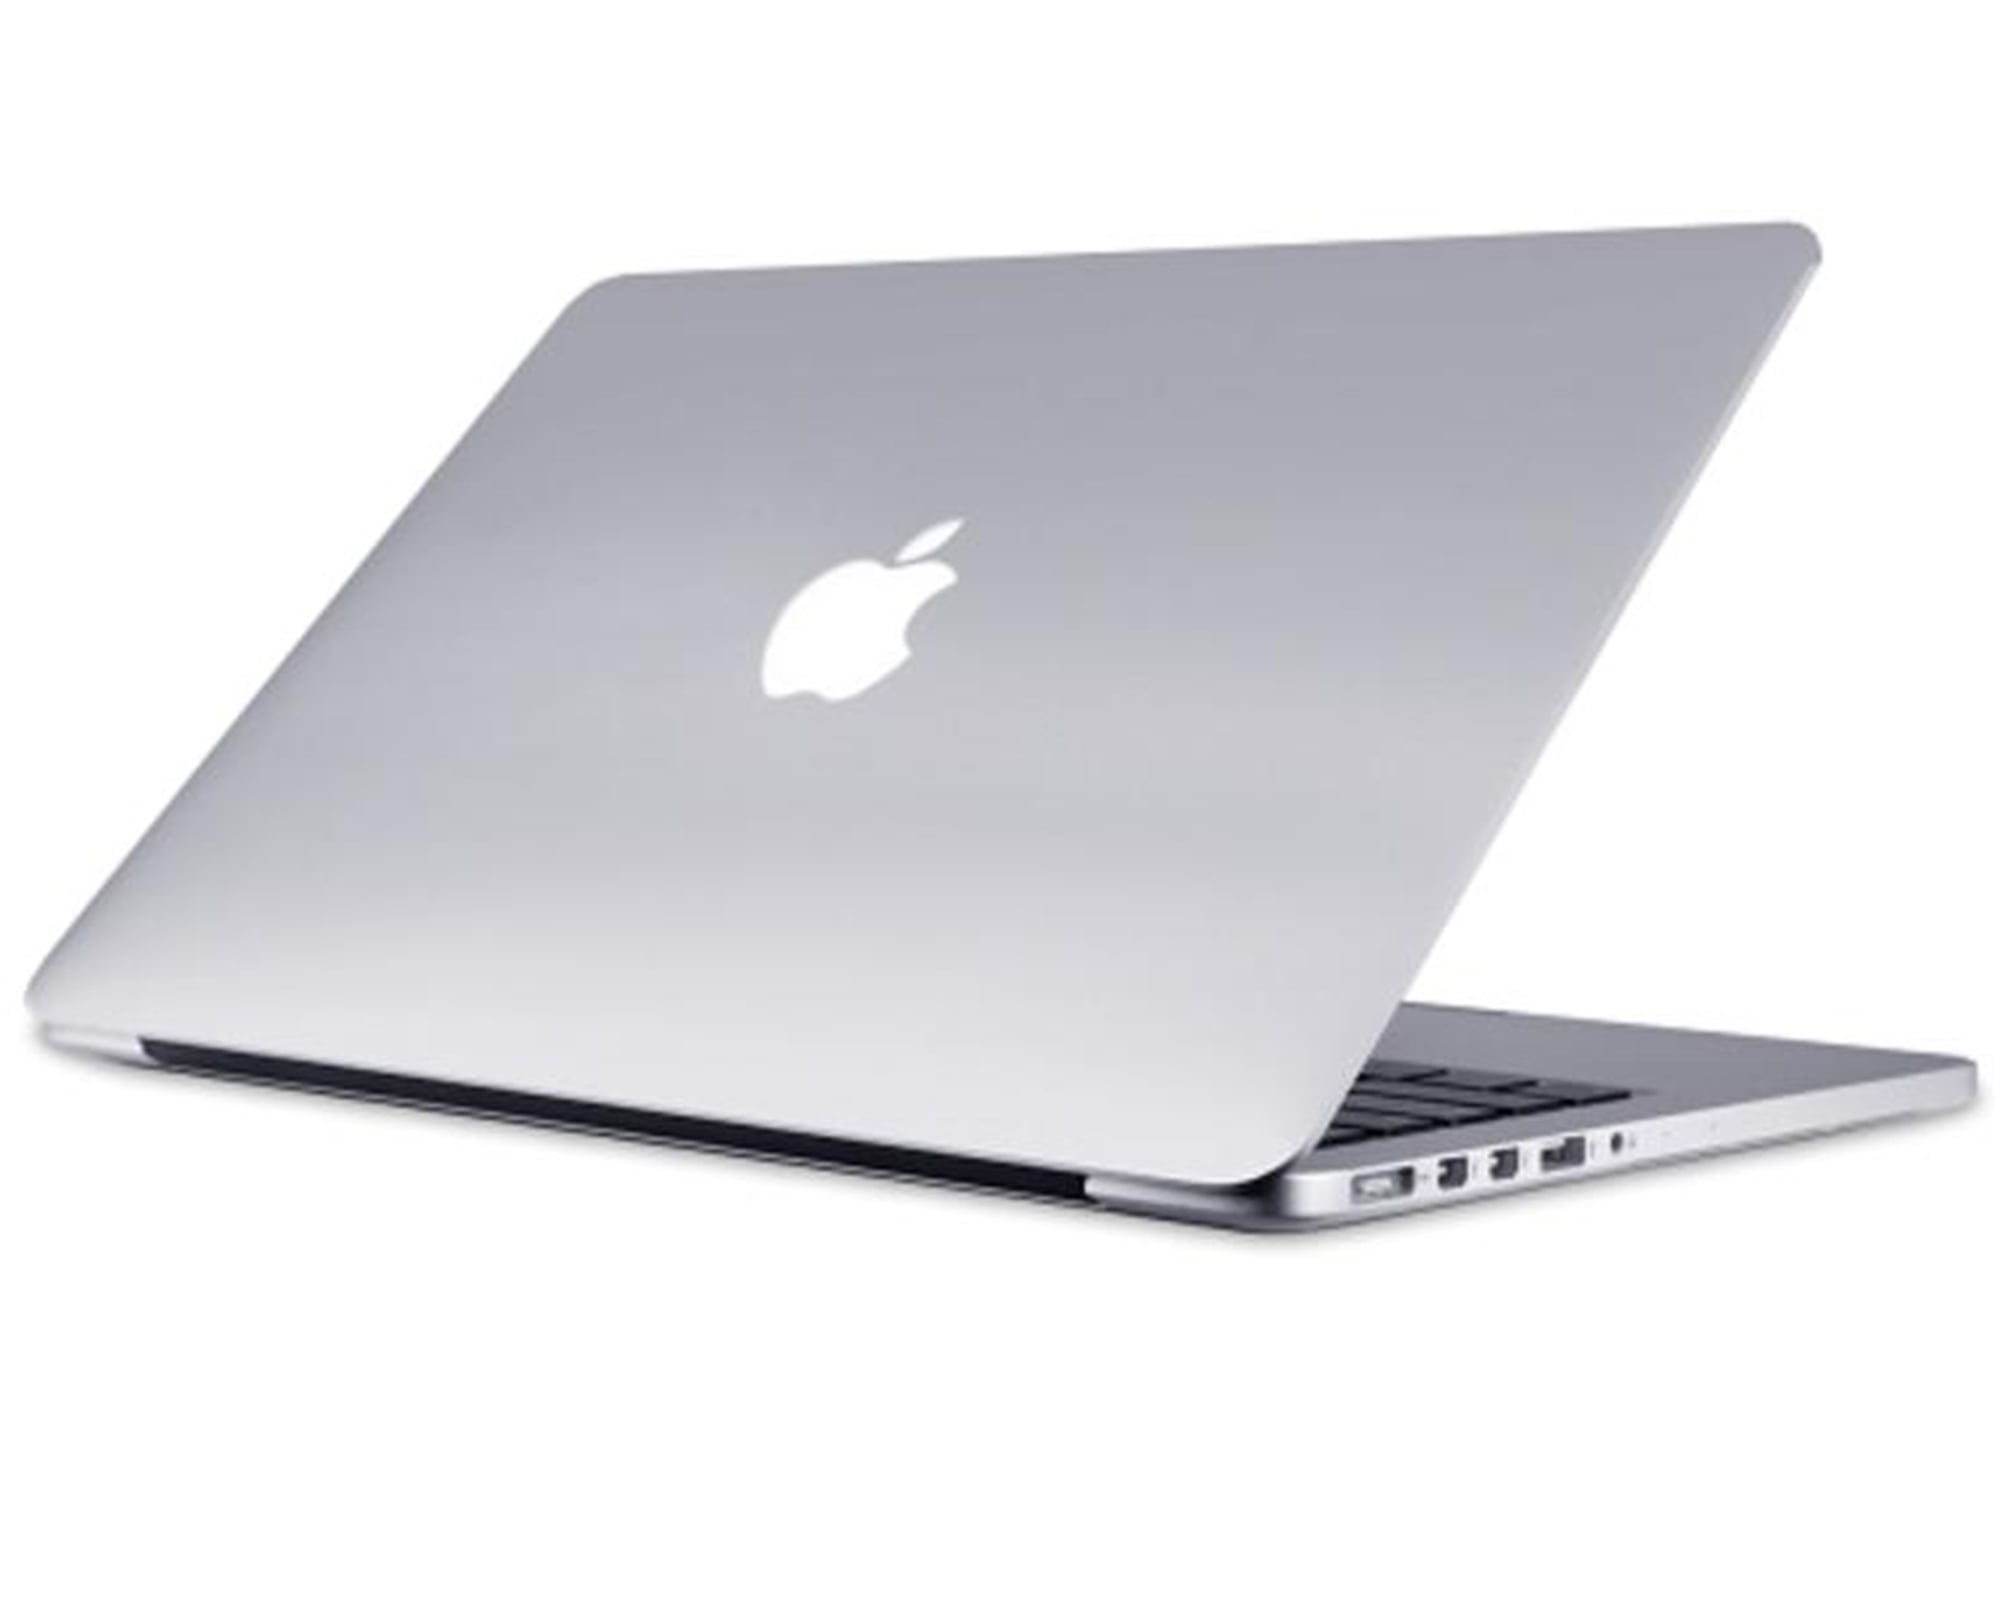 Apple MacBook Pro MD318LL/A Intel Core i7-2675QM X4 2.2GHz 4GB 500GB,  Silver (Scratch And Dent Used)